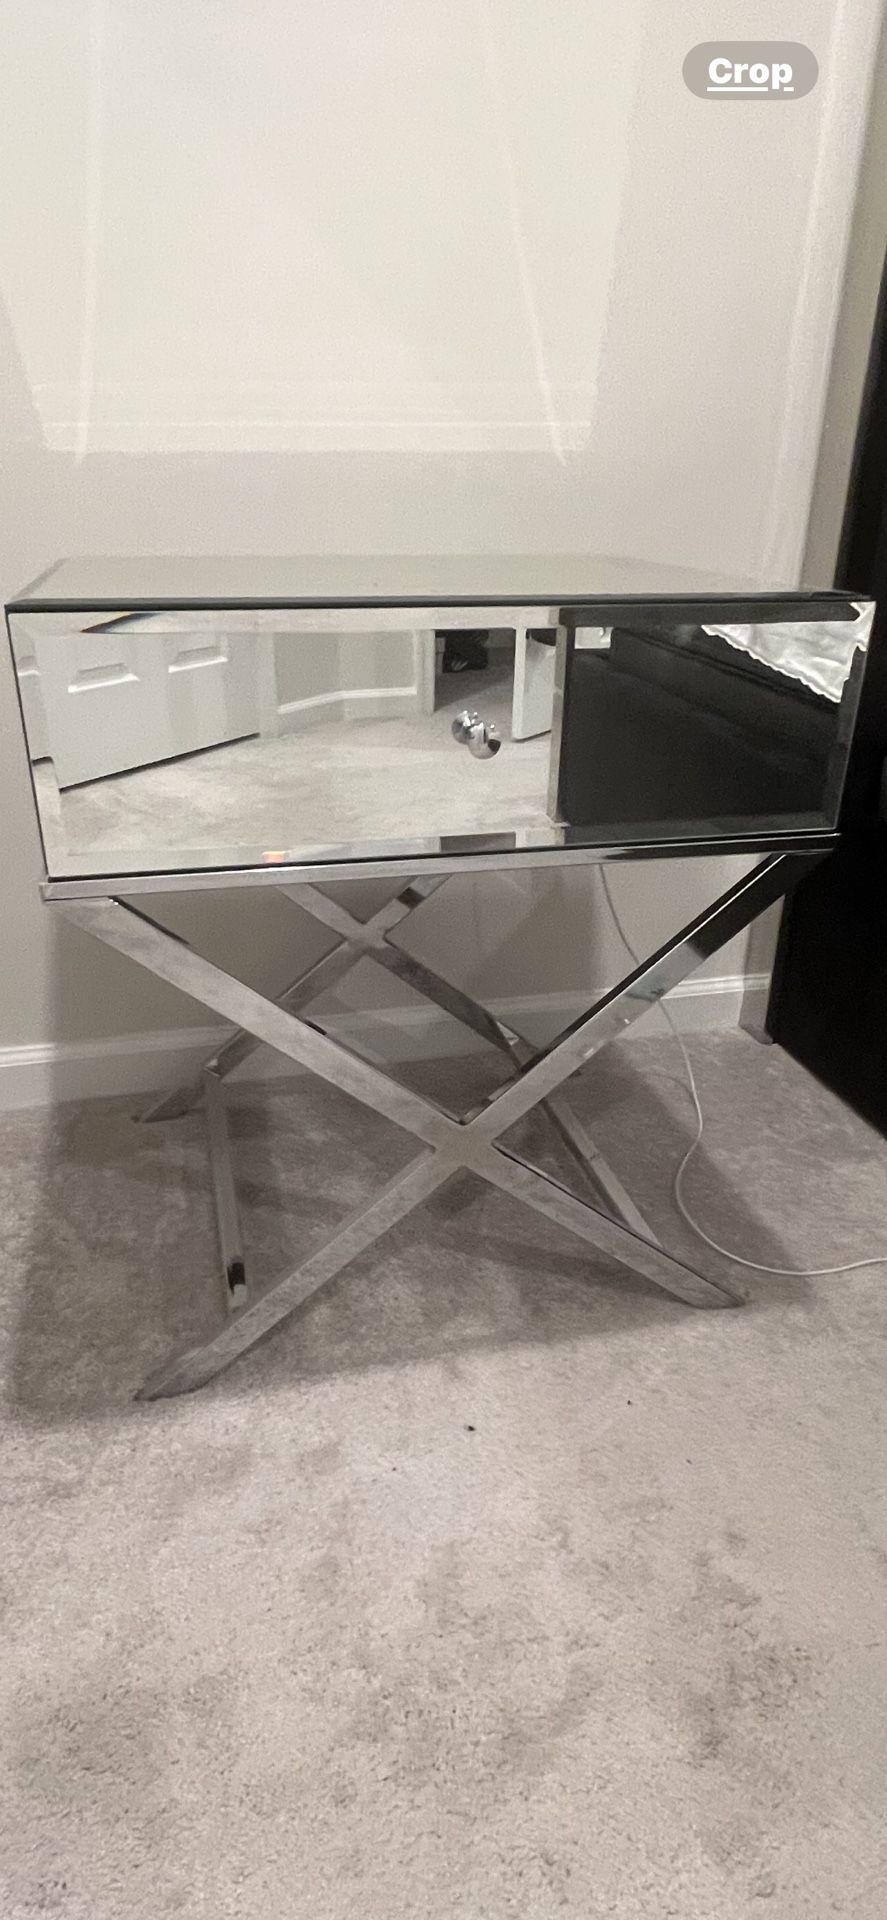   Walmart Night Stand for Sale 